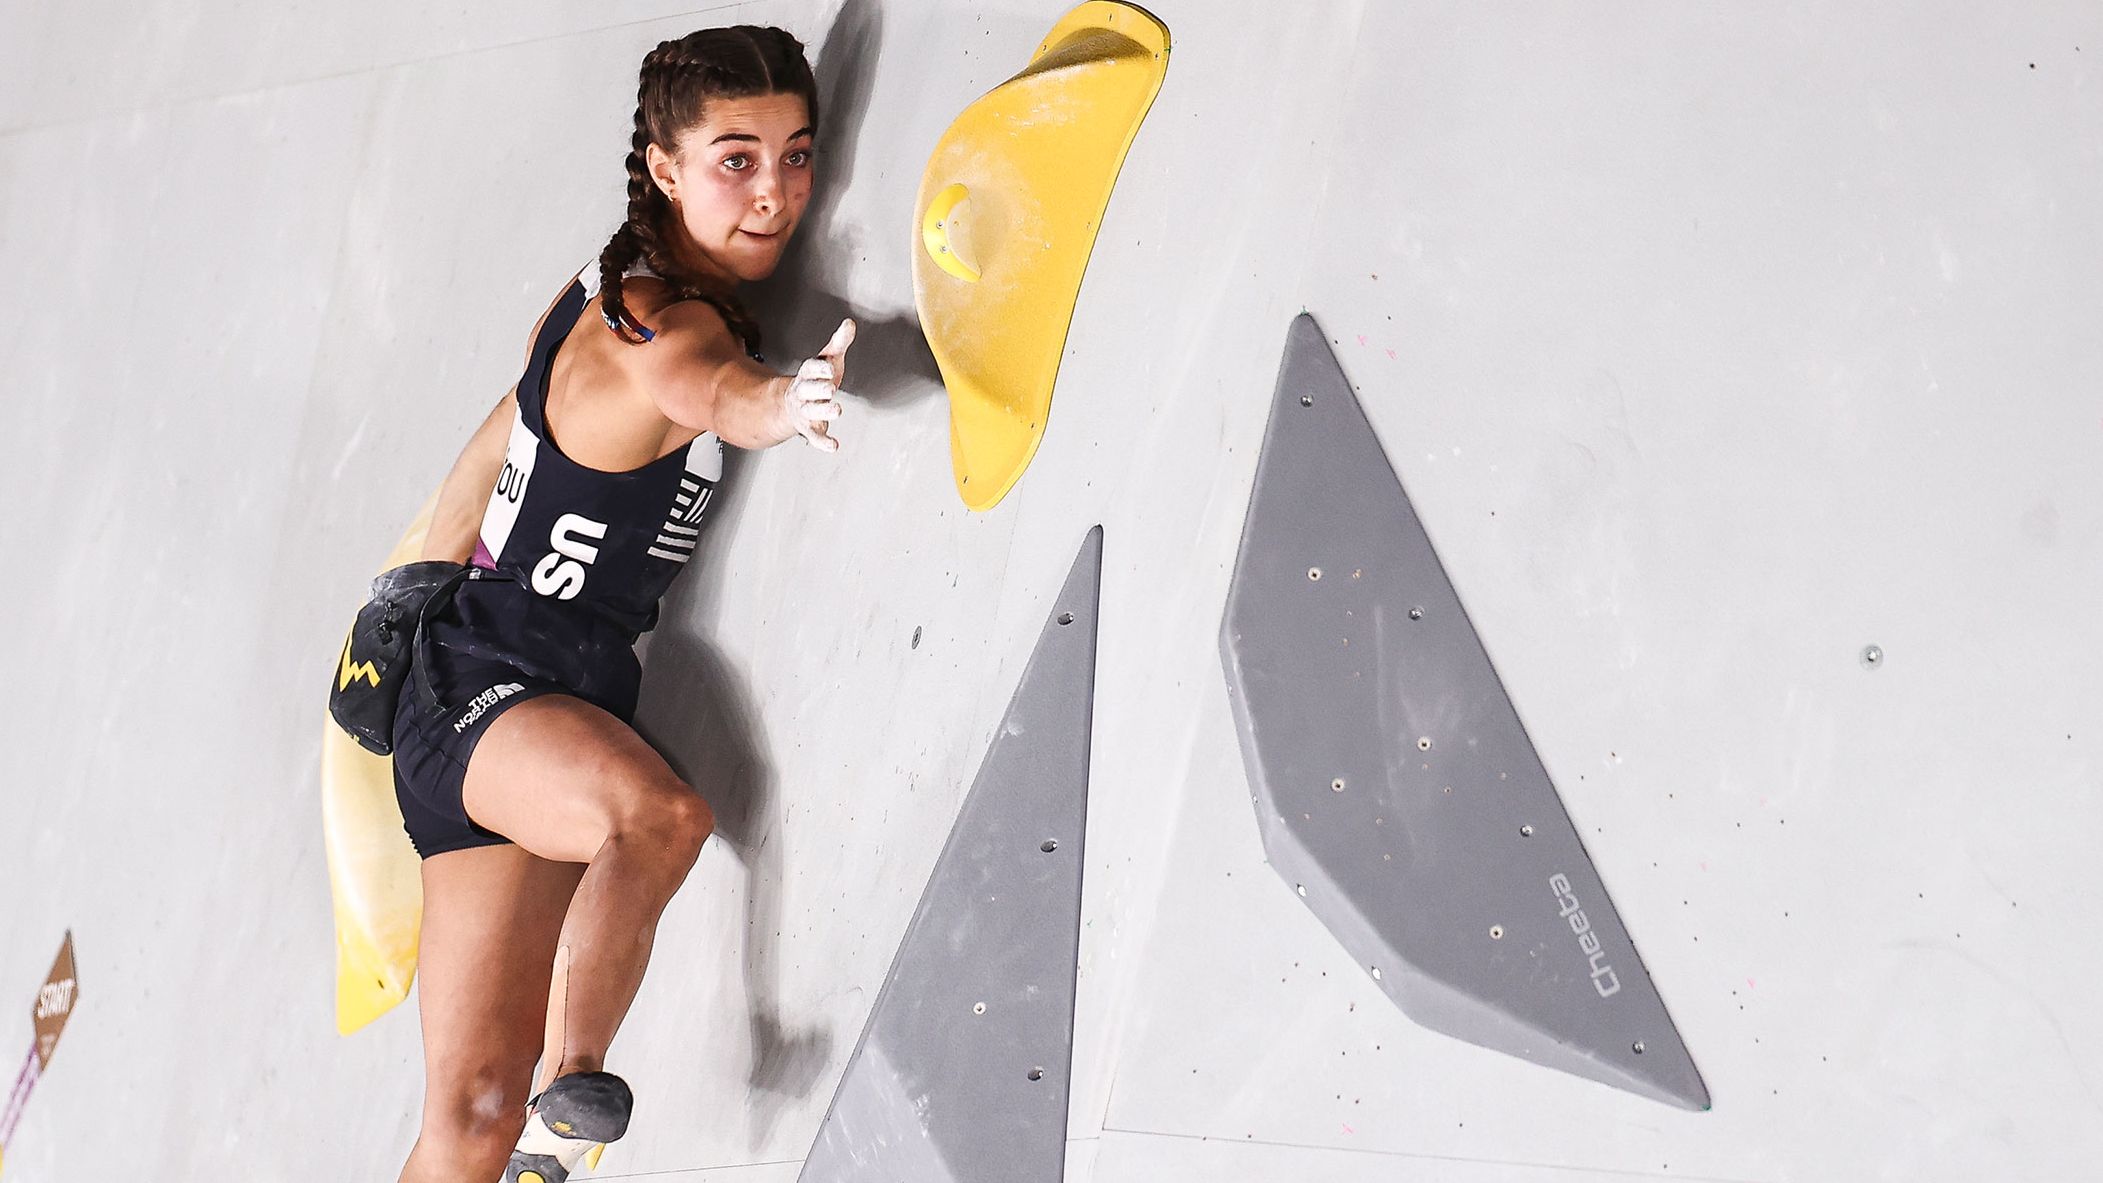 Sport climbing debuted at the 2020 Tokyo Olympics, held in 2021. Here's US athlete Brooke Raboutou. 